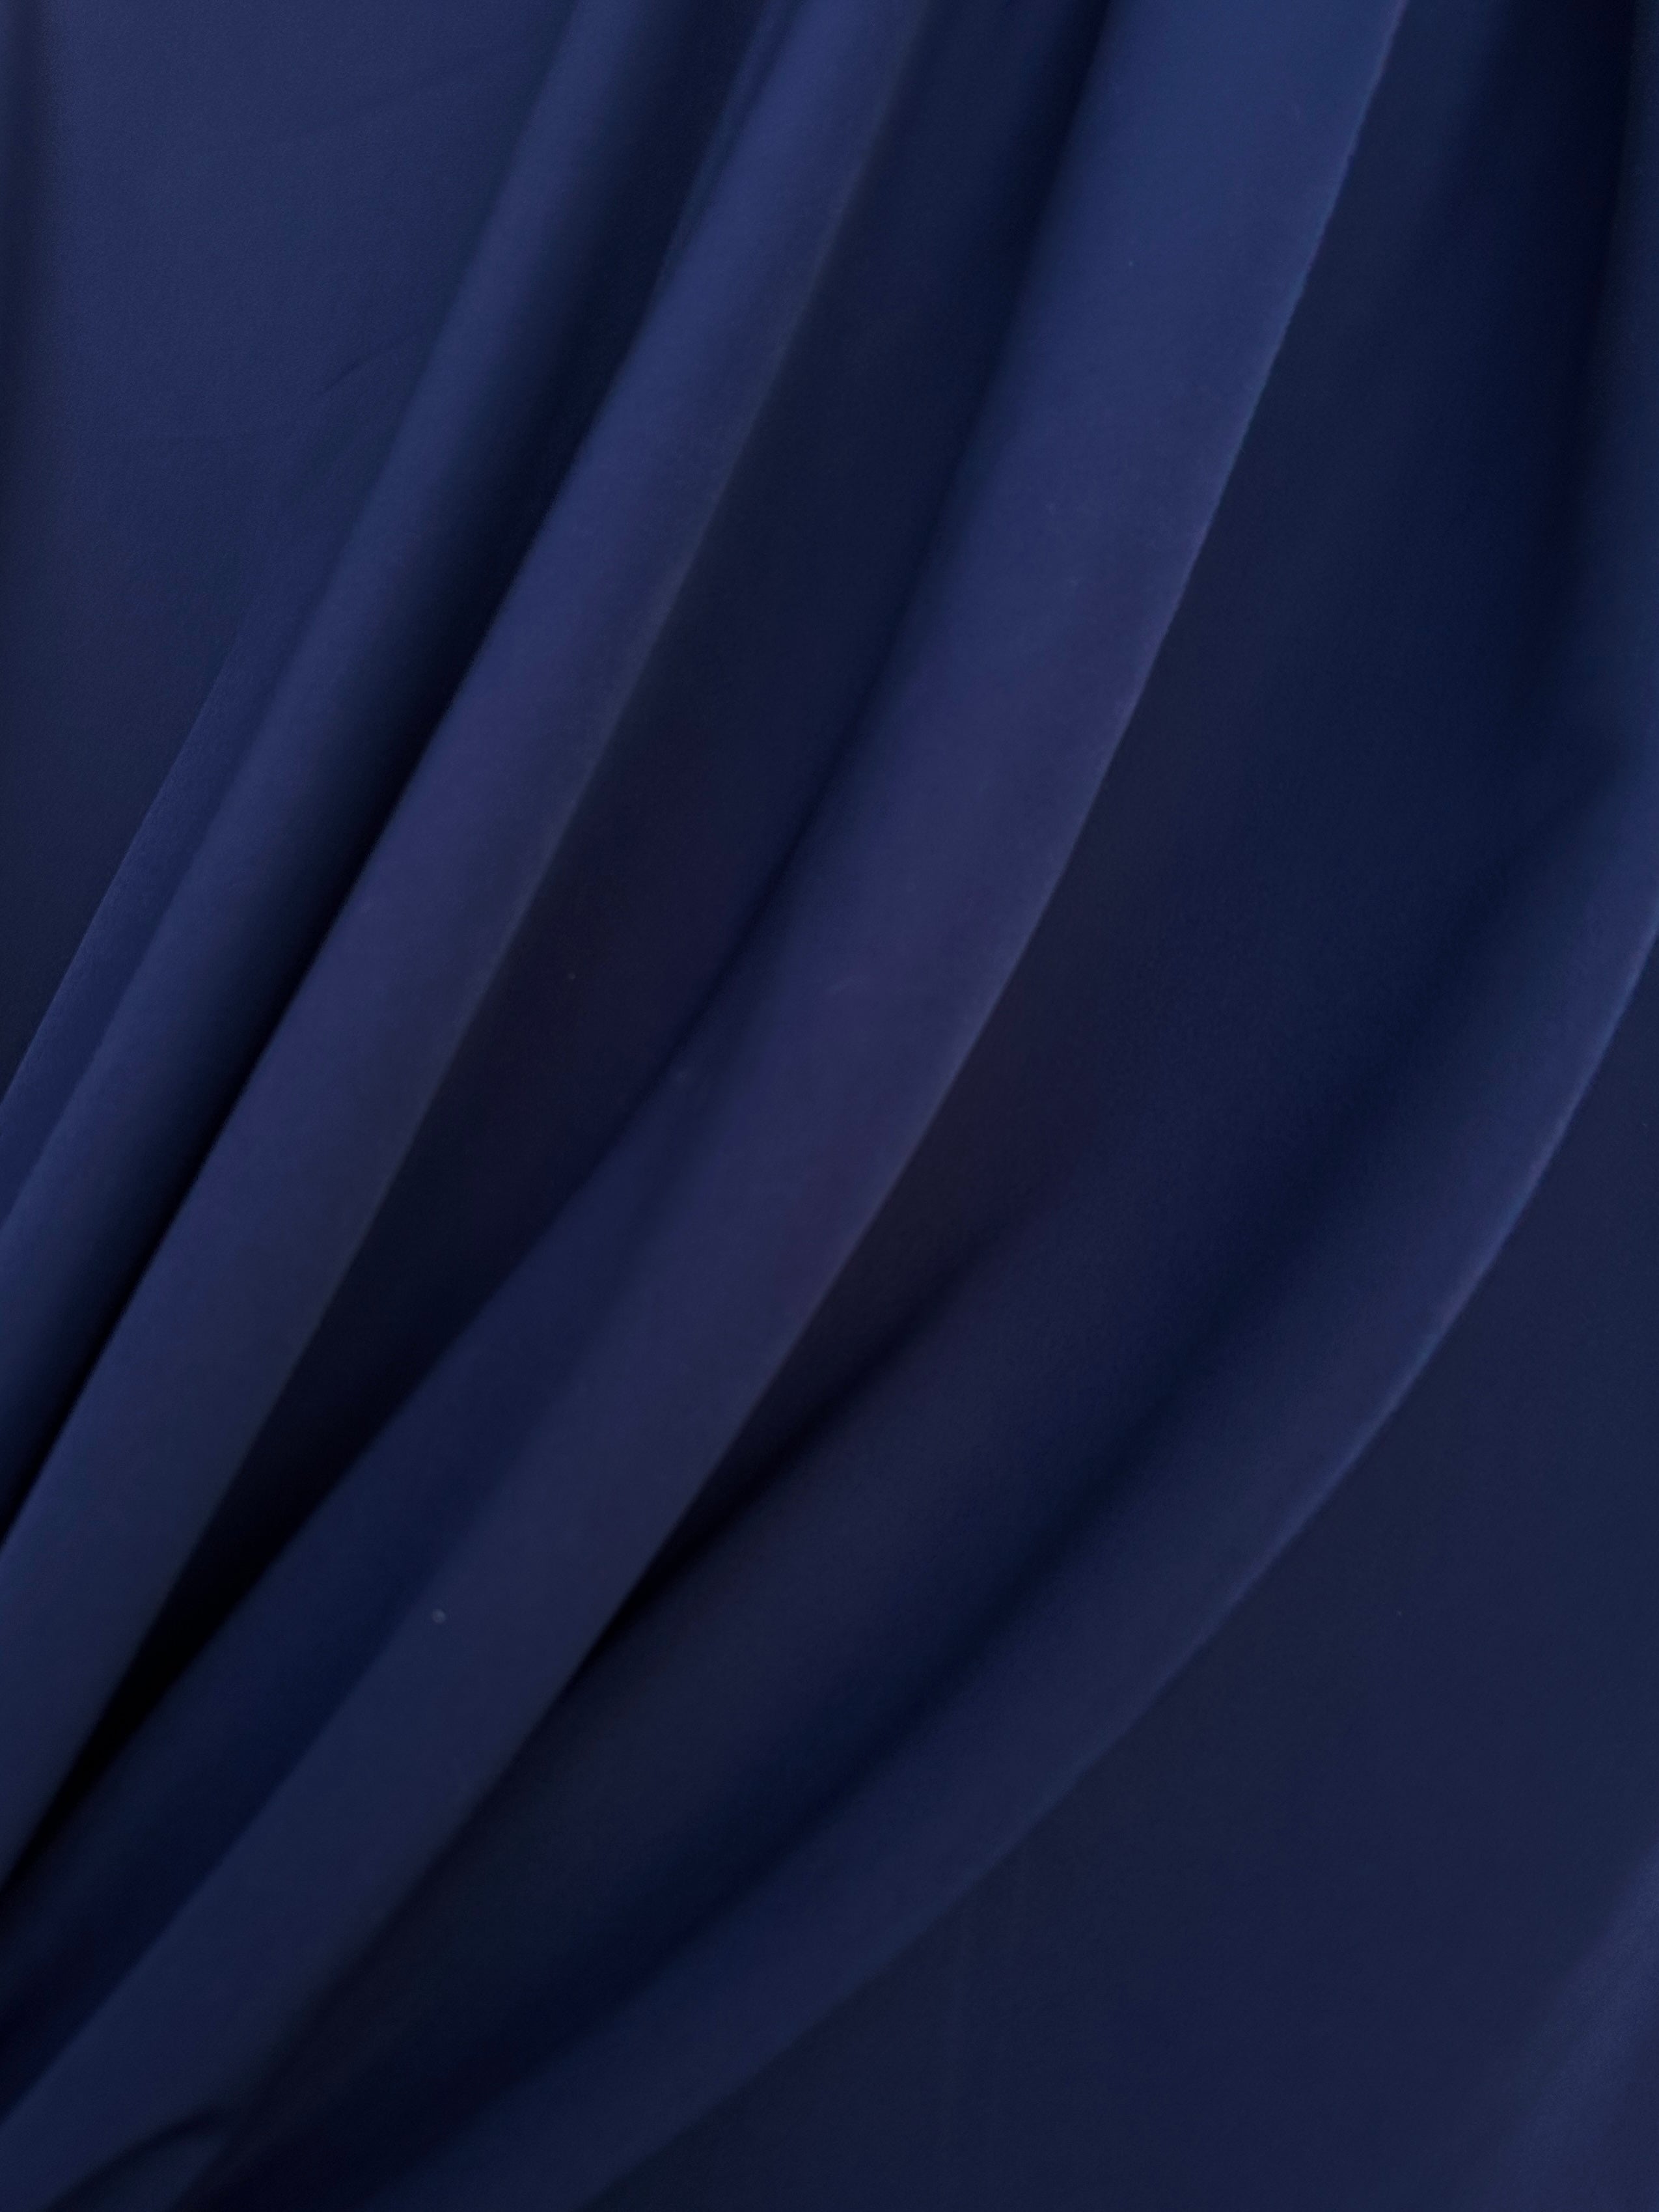 navy stretch crepe, navy blue stretch crepe, blue crepe fabric, crepe clothing material, silk crepe, crepe satin, crepe for dress, pure crepe fabric, crepe on sale, wedding crepe, crepe fabric store usa